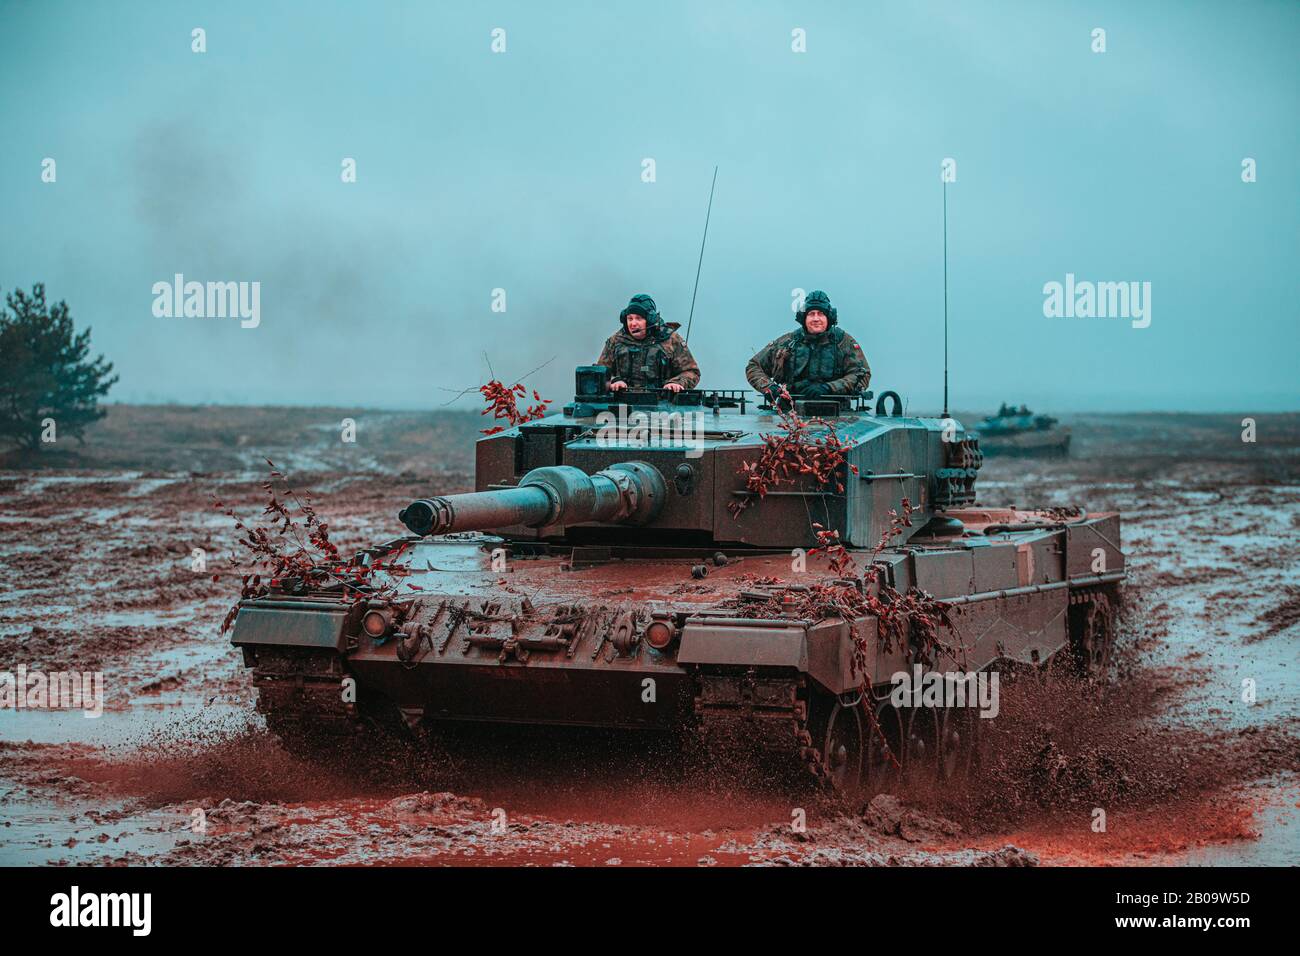 Polish Soldiers, assigned to the 1st Warsaw Armored Brigade operate a Leopard 2 tank during a multinational training scenario in support of NATO enhanced Forward Presence Battle Group Poland February 6, 2020 in Bemowo Piskie, Poland. The NATO enhanced Forward Presence consists of four battalion-sized battle groups deployed on a persistent rotational basis to Estonia, Latvia, Lithuania and Poland. Stock Photo